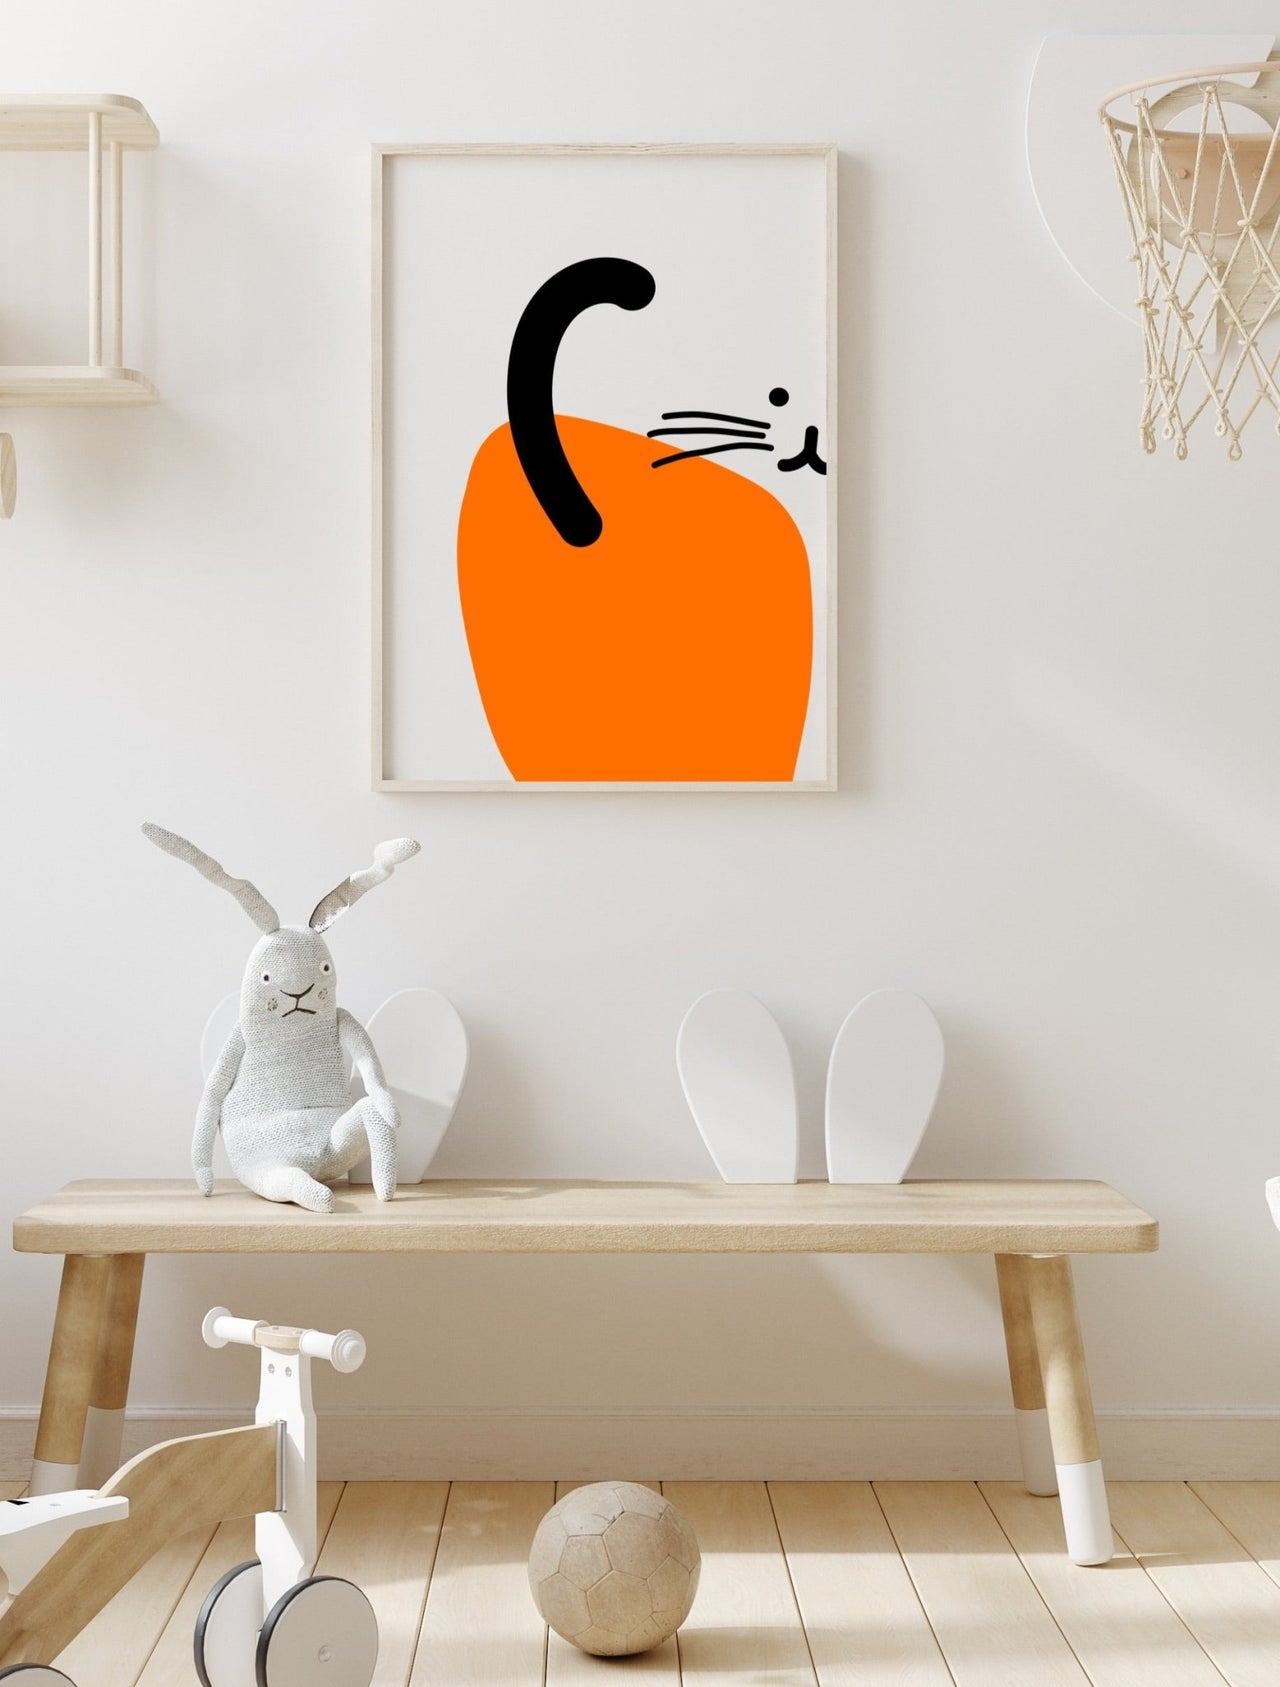 ORANGE CAT ILLUSTRATION GRAPHIC ART PRINT WITH A WHITE BACKGROUND SET IN A KIDS BEDROOM